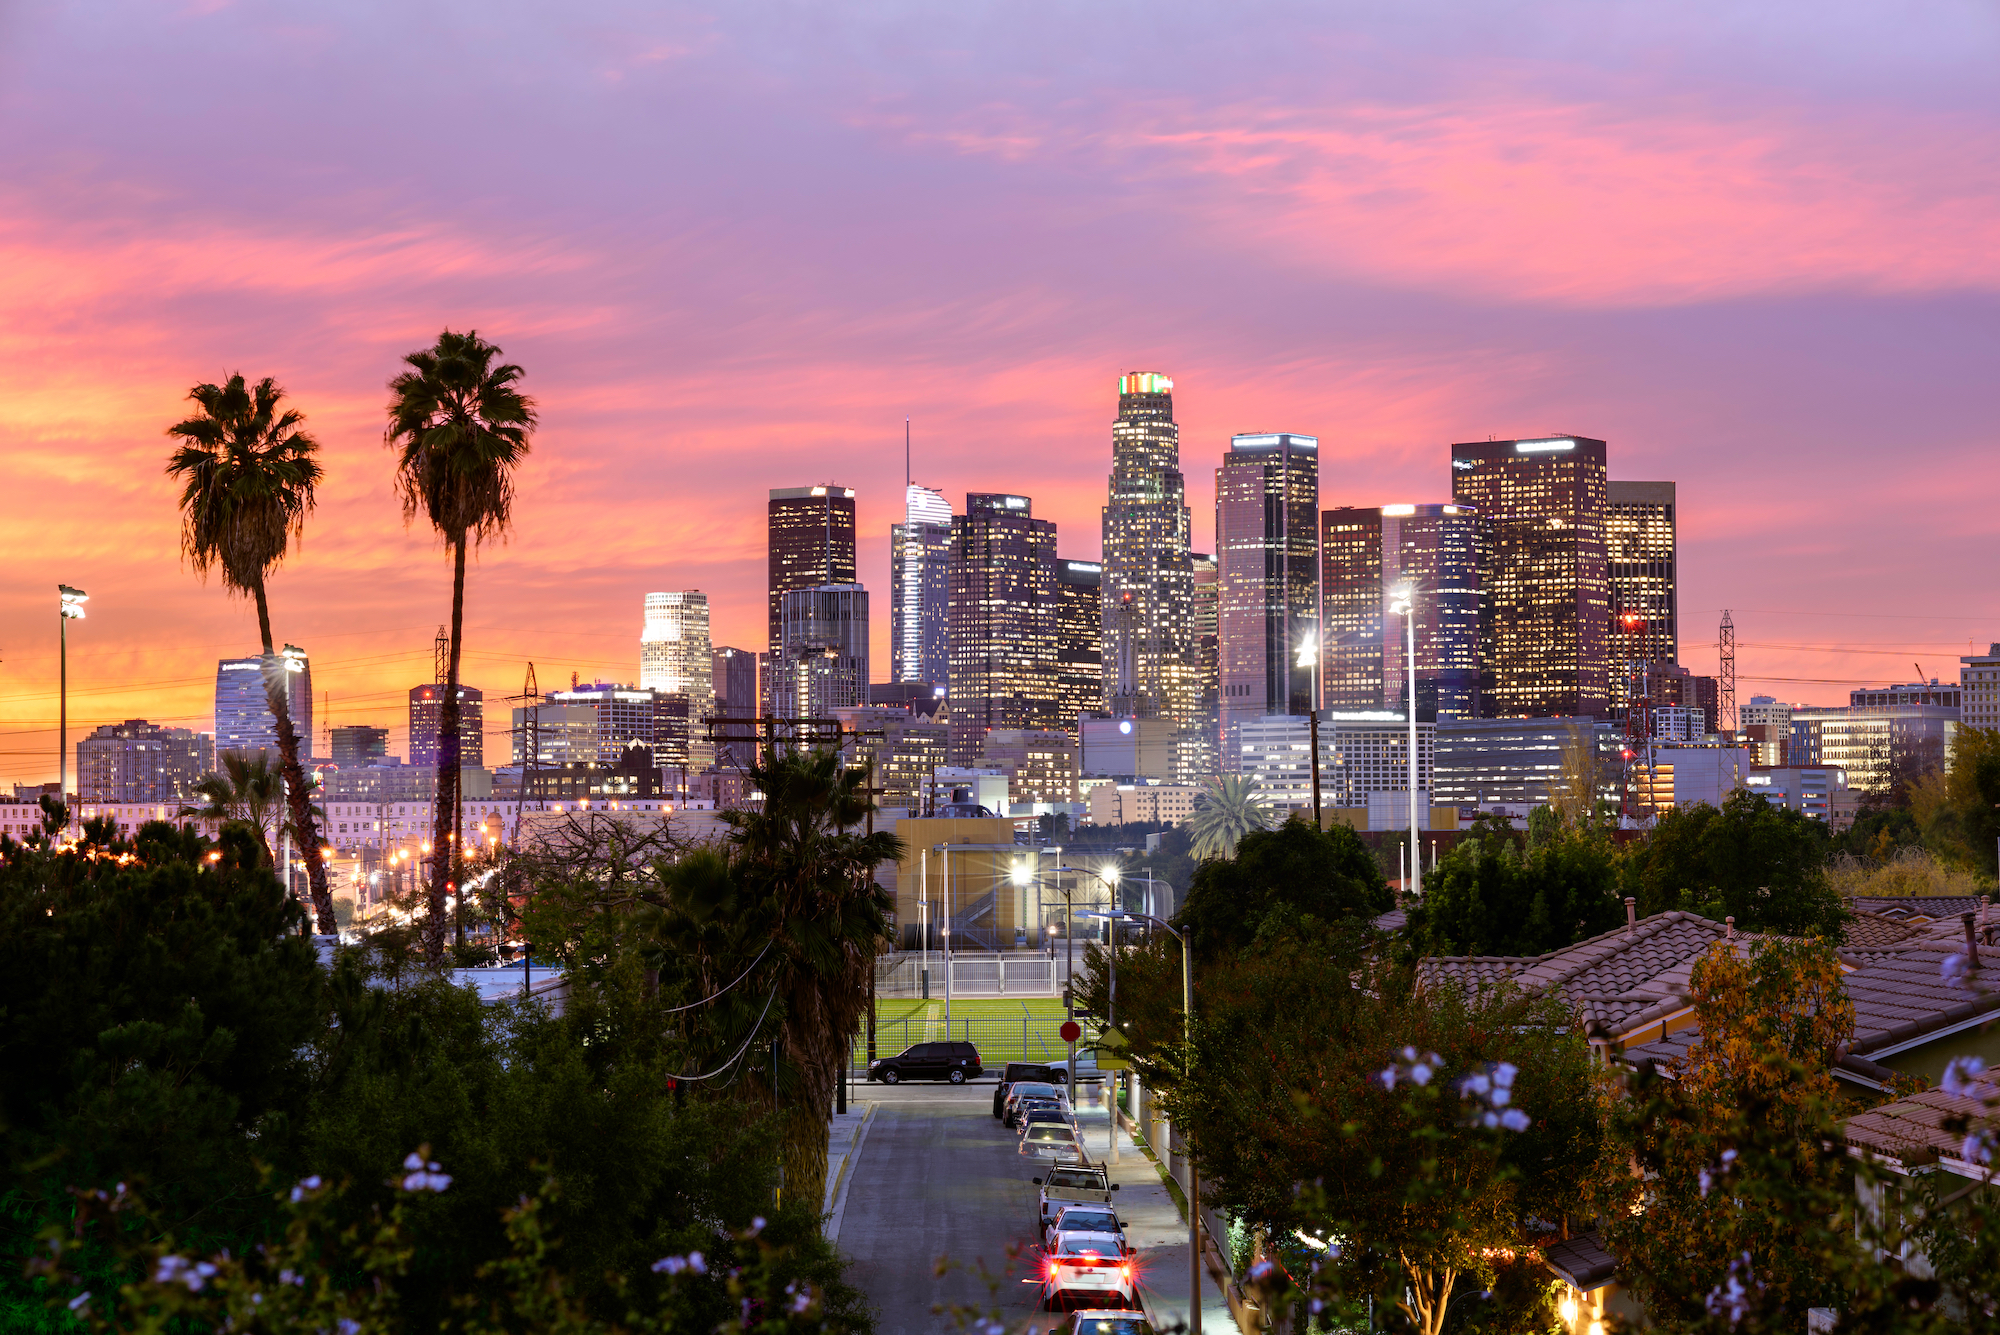 The LA skyline is pictured.